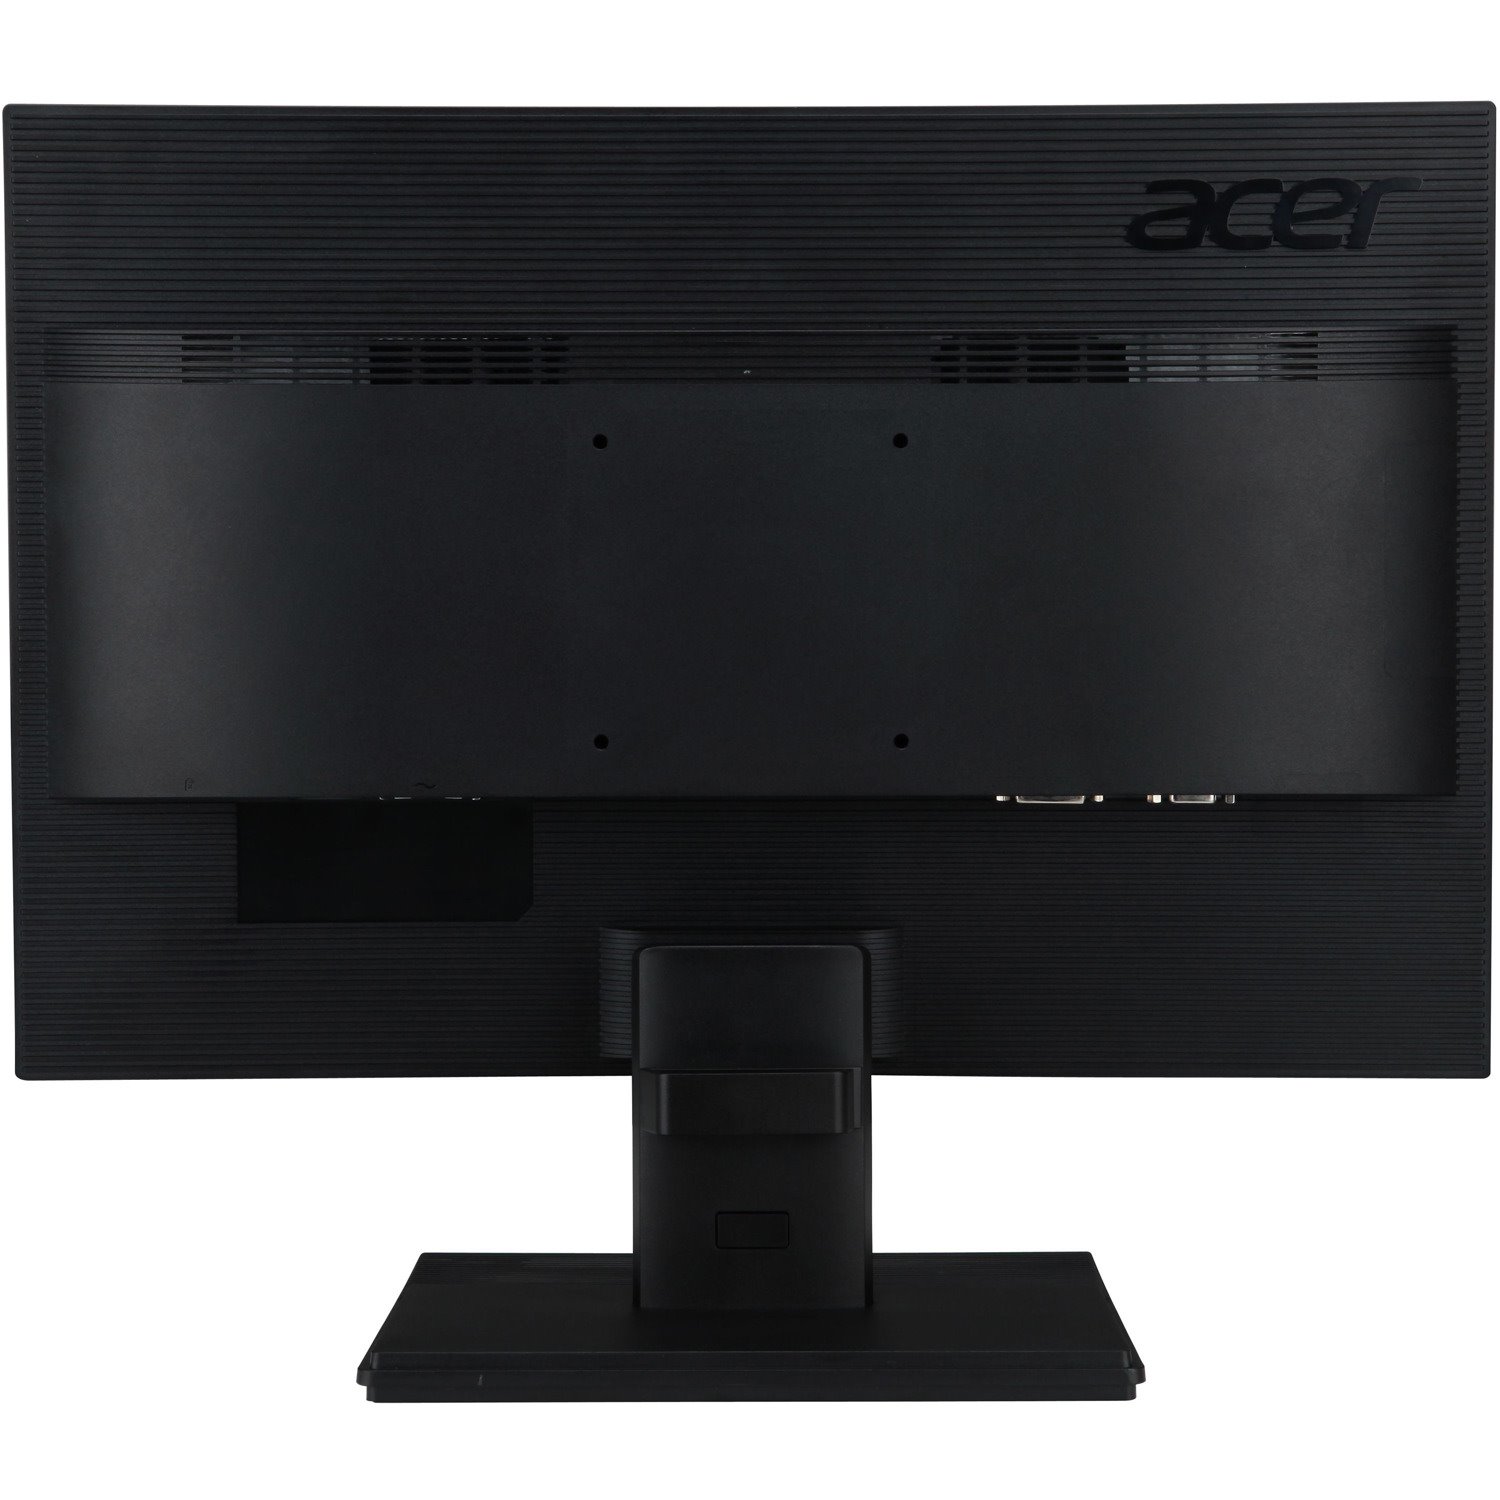 Acer V226WL 22" LED LCD Monitor - 16:10 - 5ms - Free 3 year Warranty